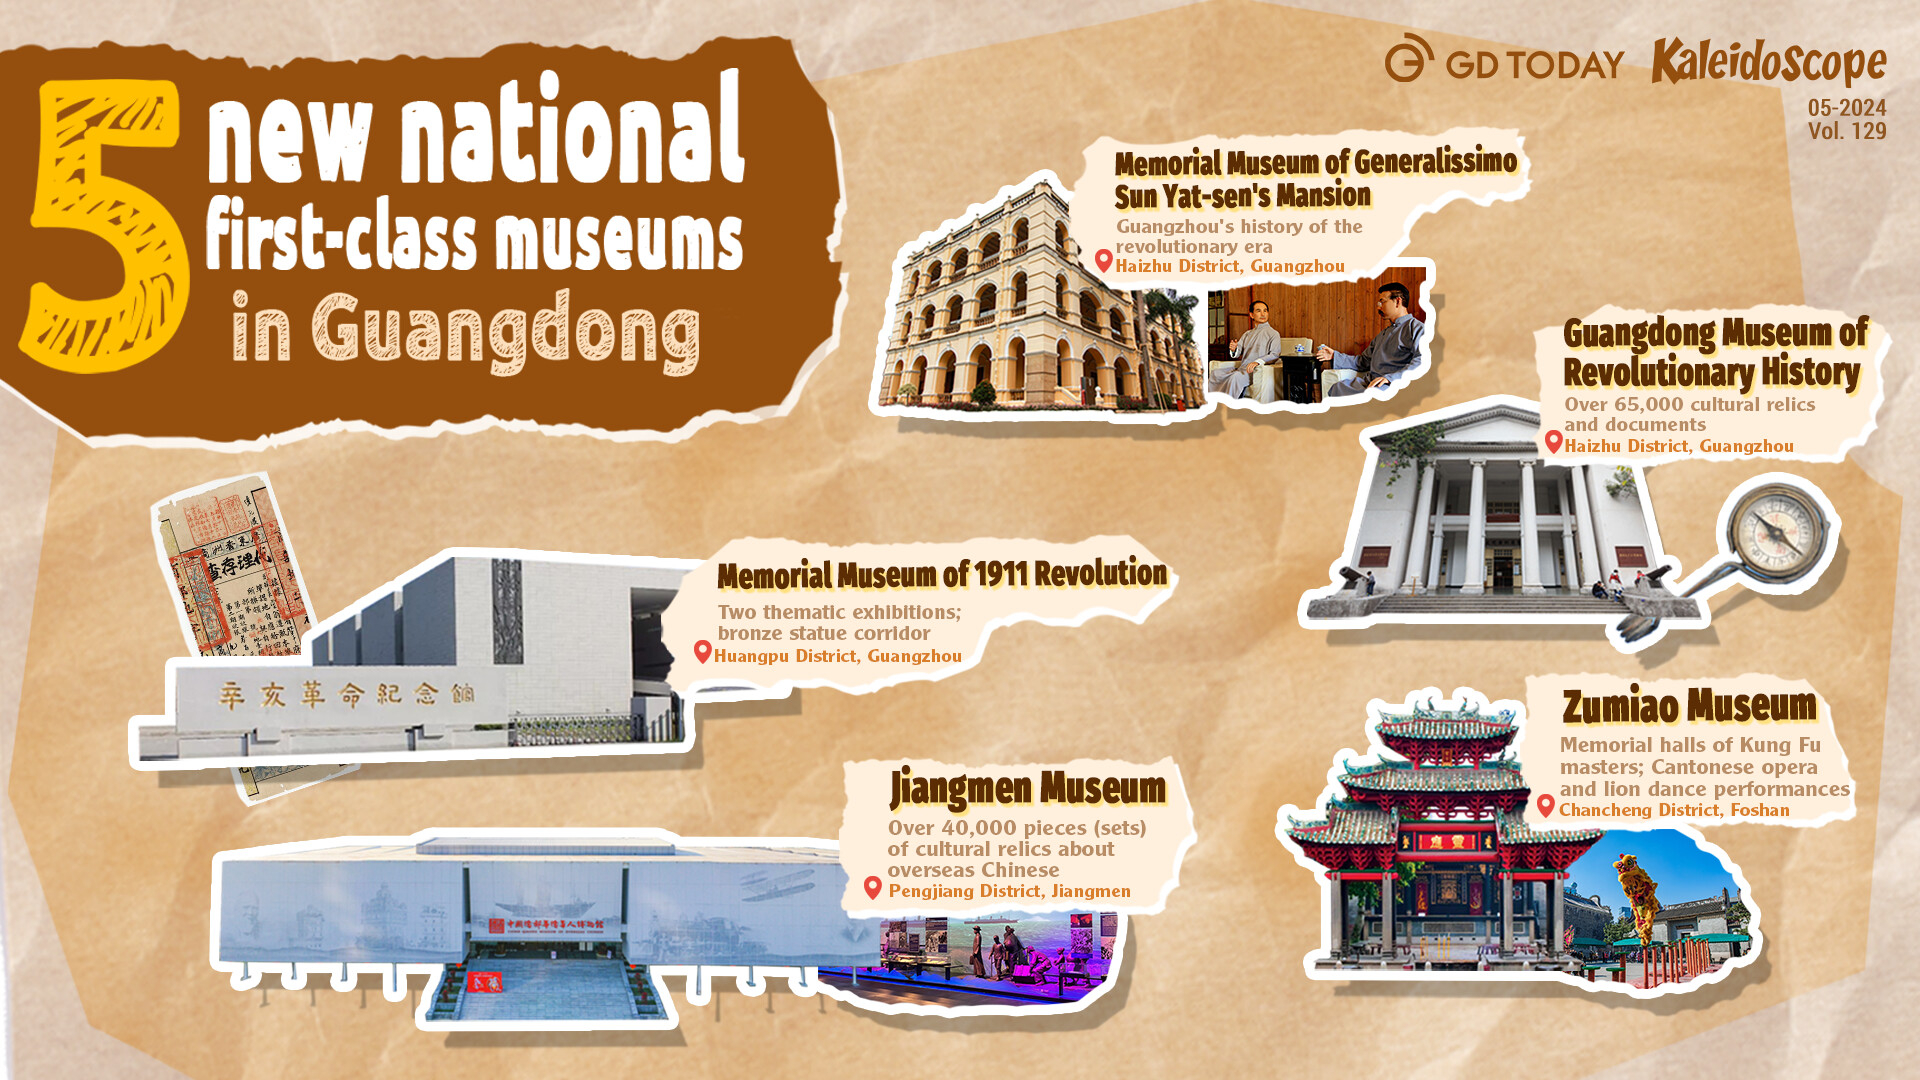 Explore 5 new national first-class museums in Guangdong